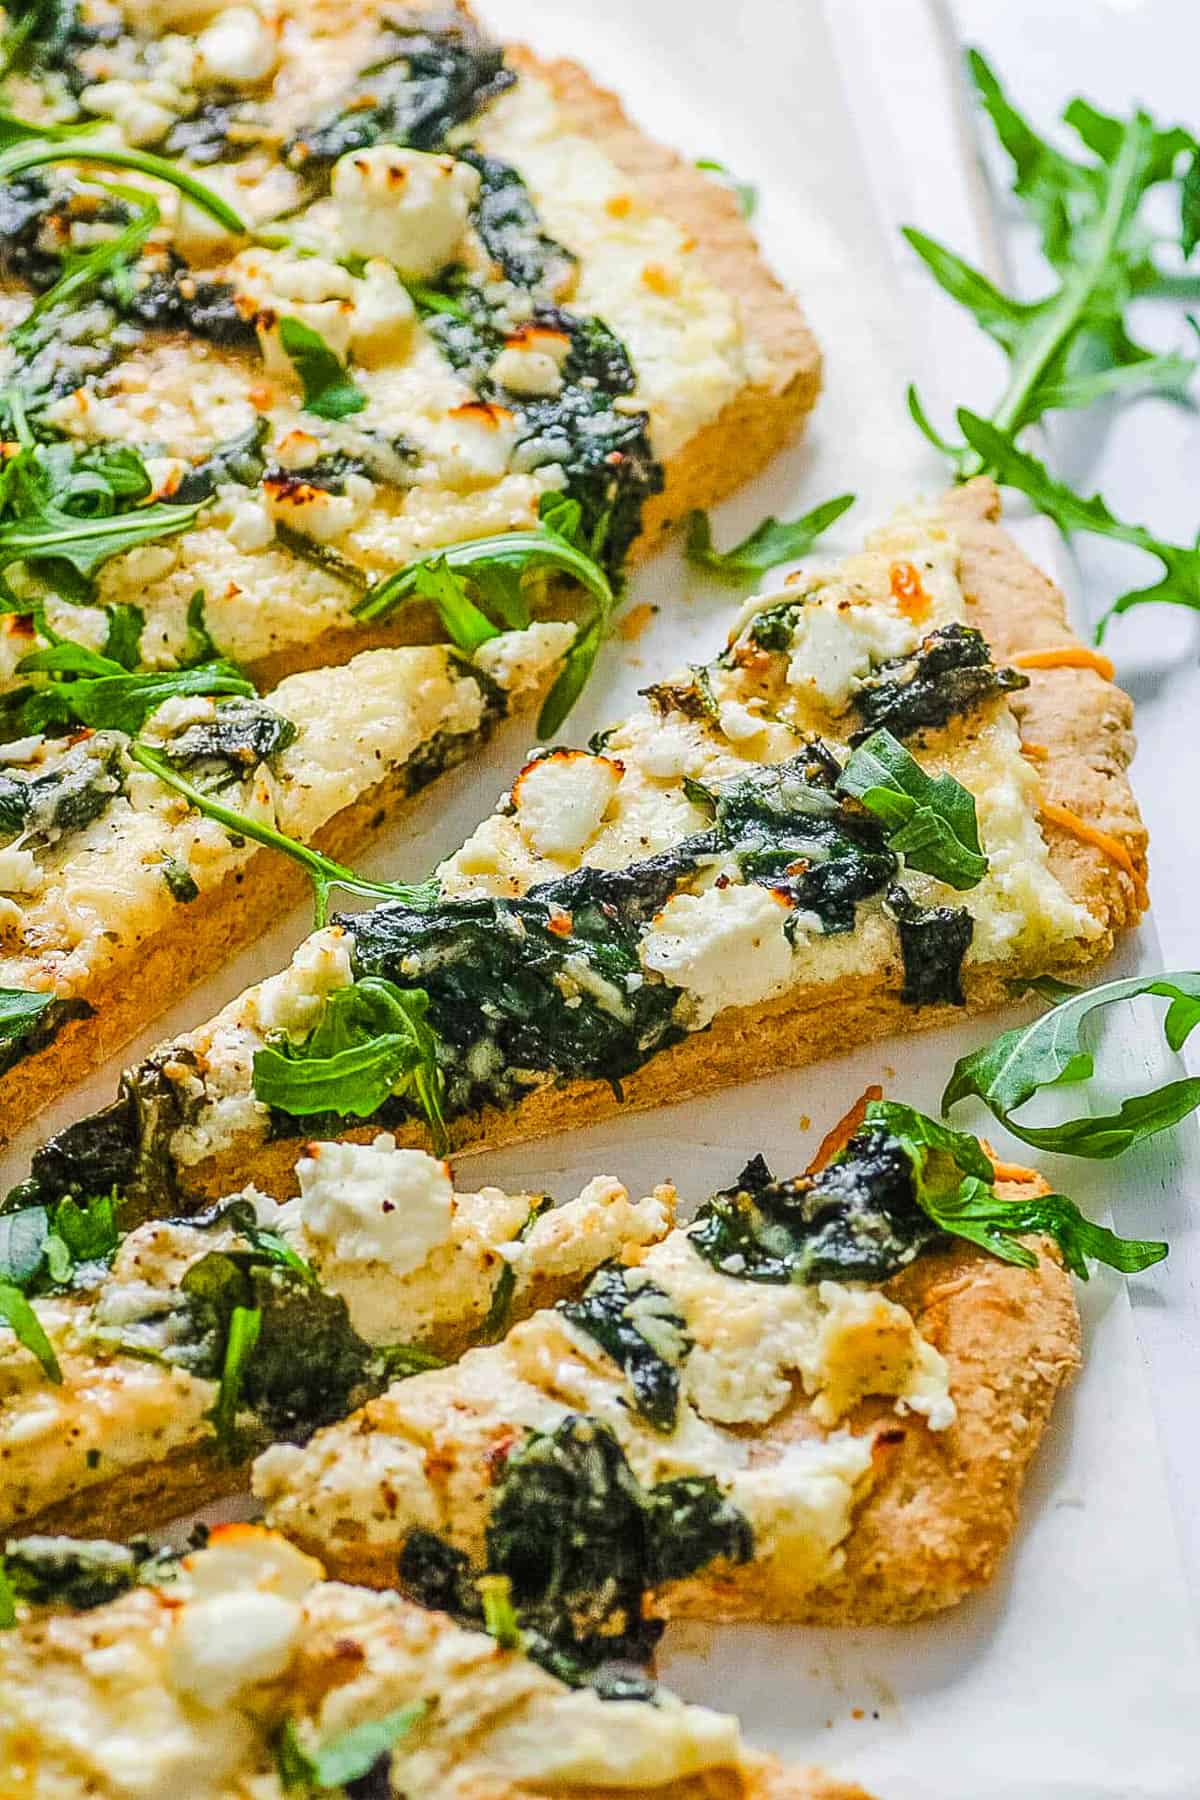 Spinach pizza with ricotta and feta cheese sliced on a white platter.